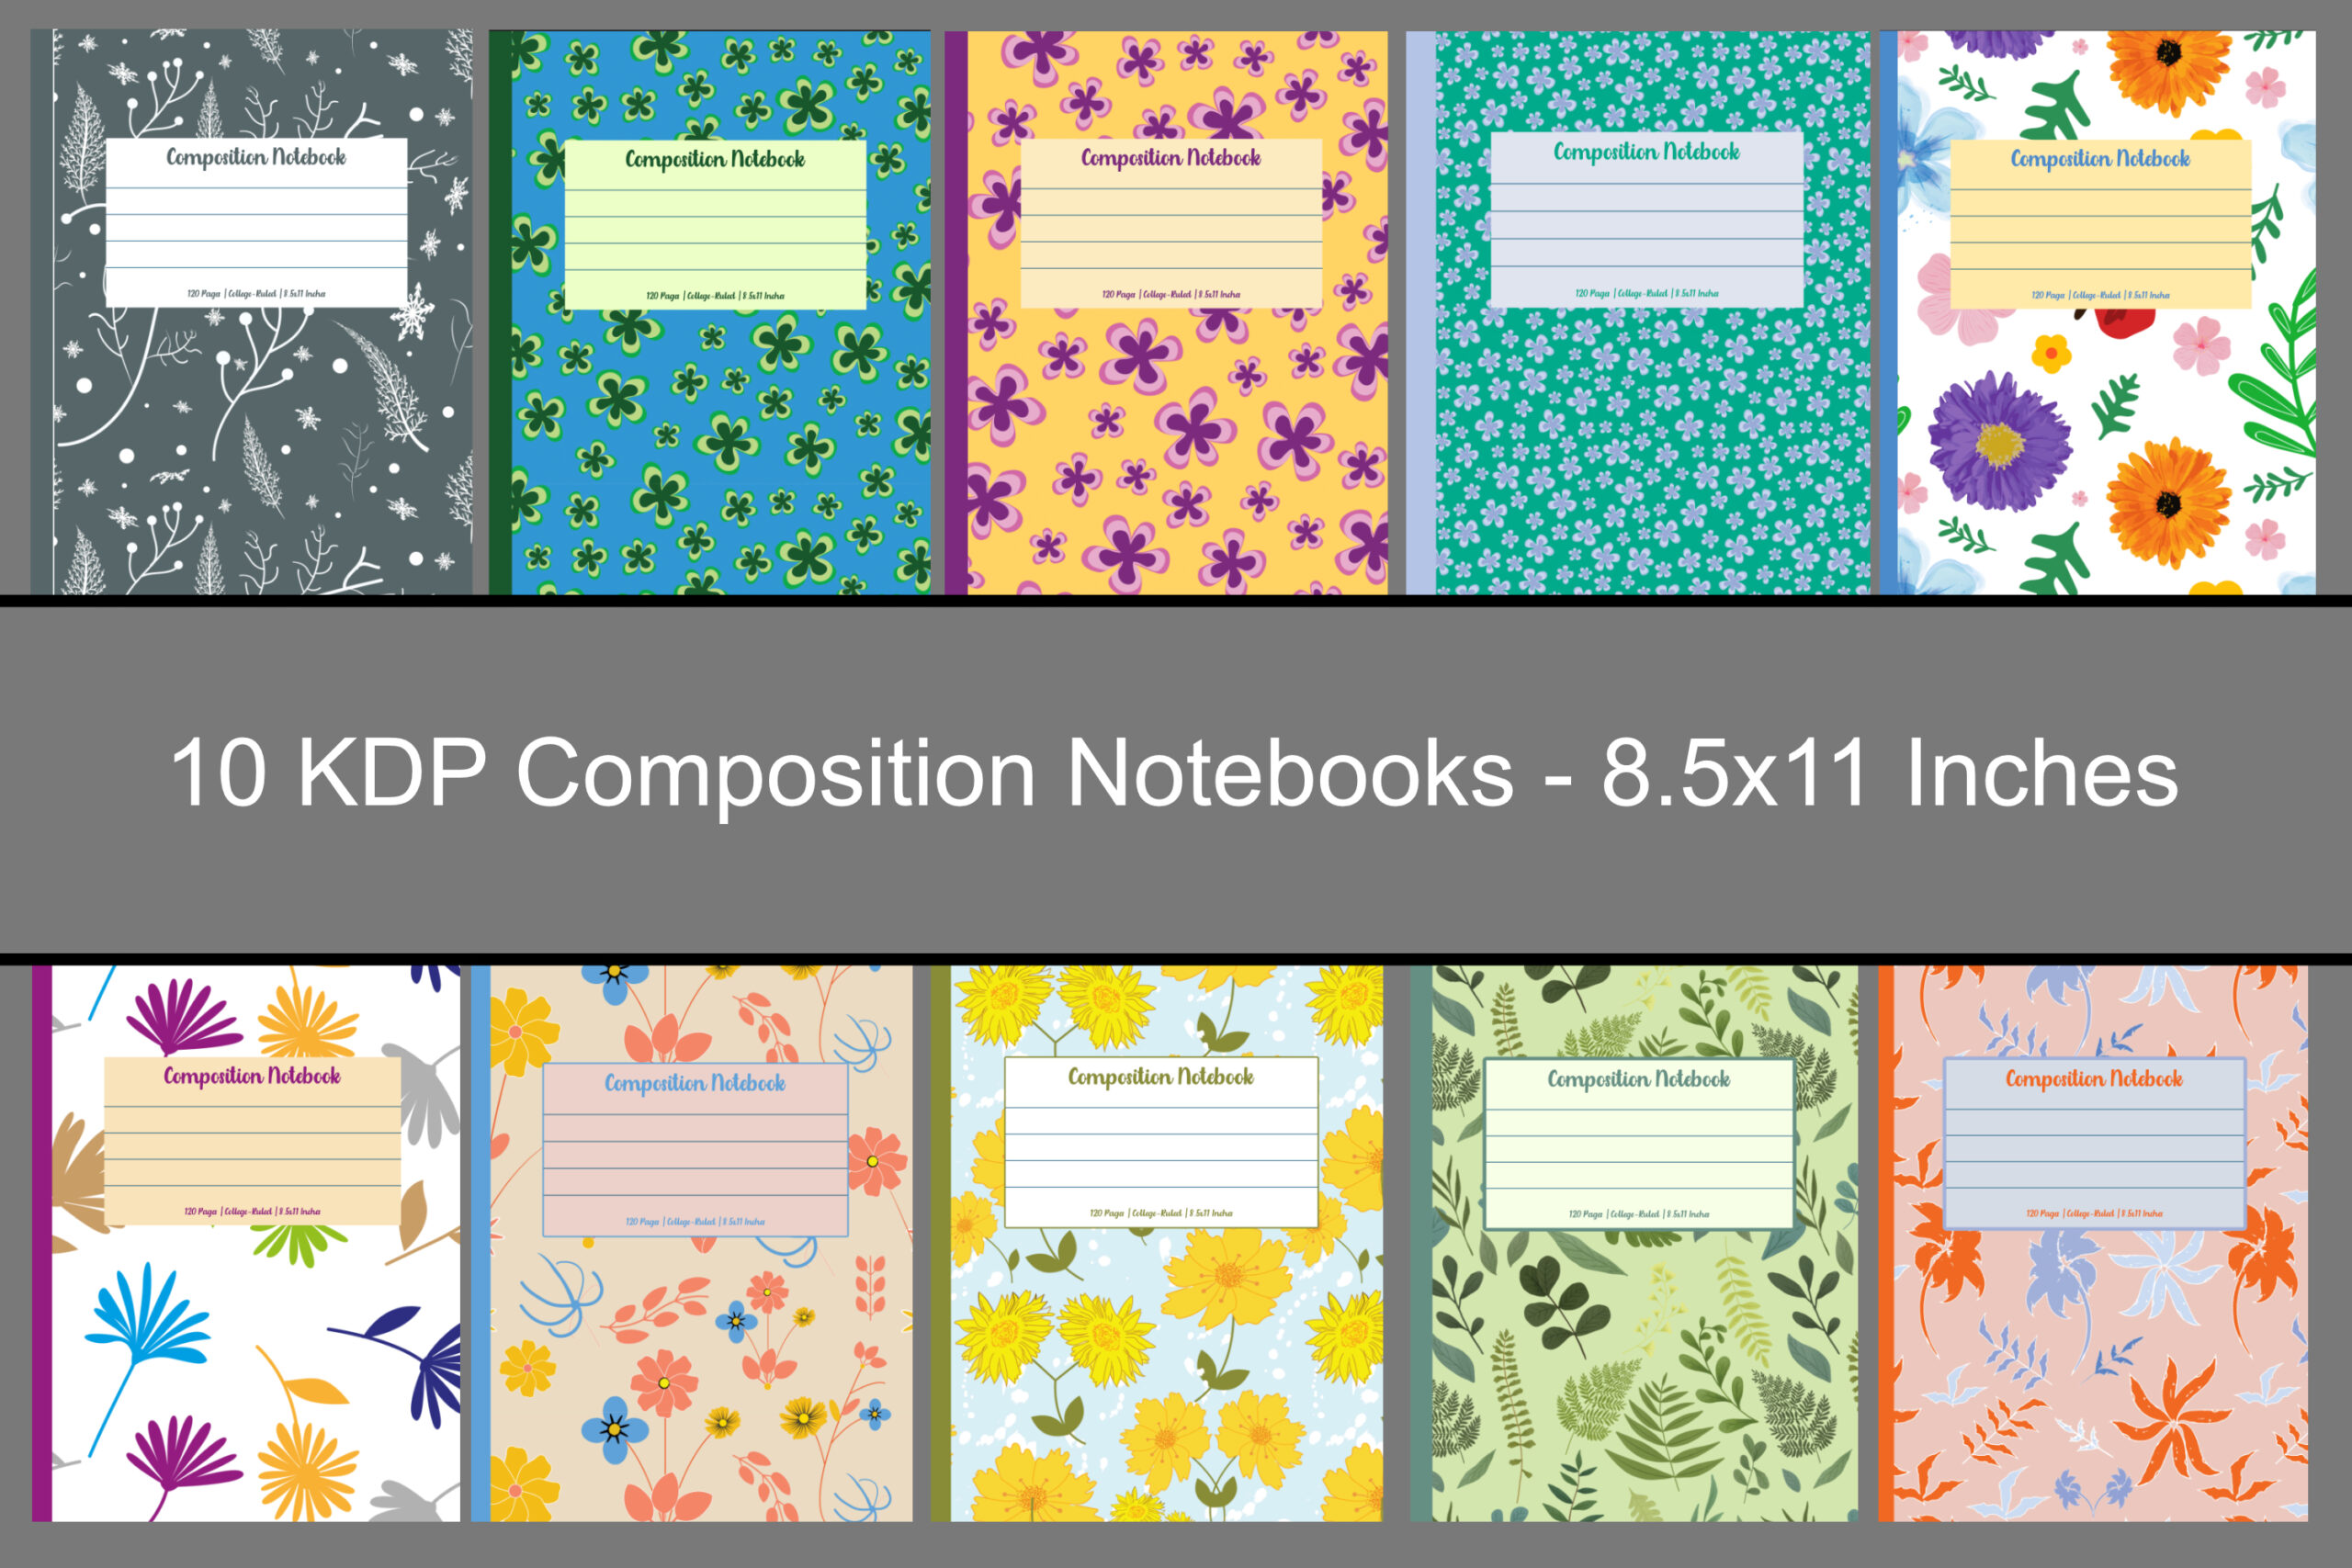 KDP Notebook Covers